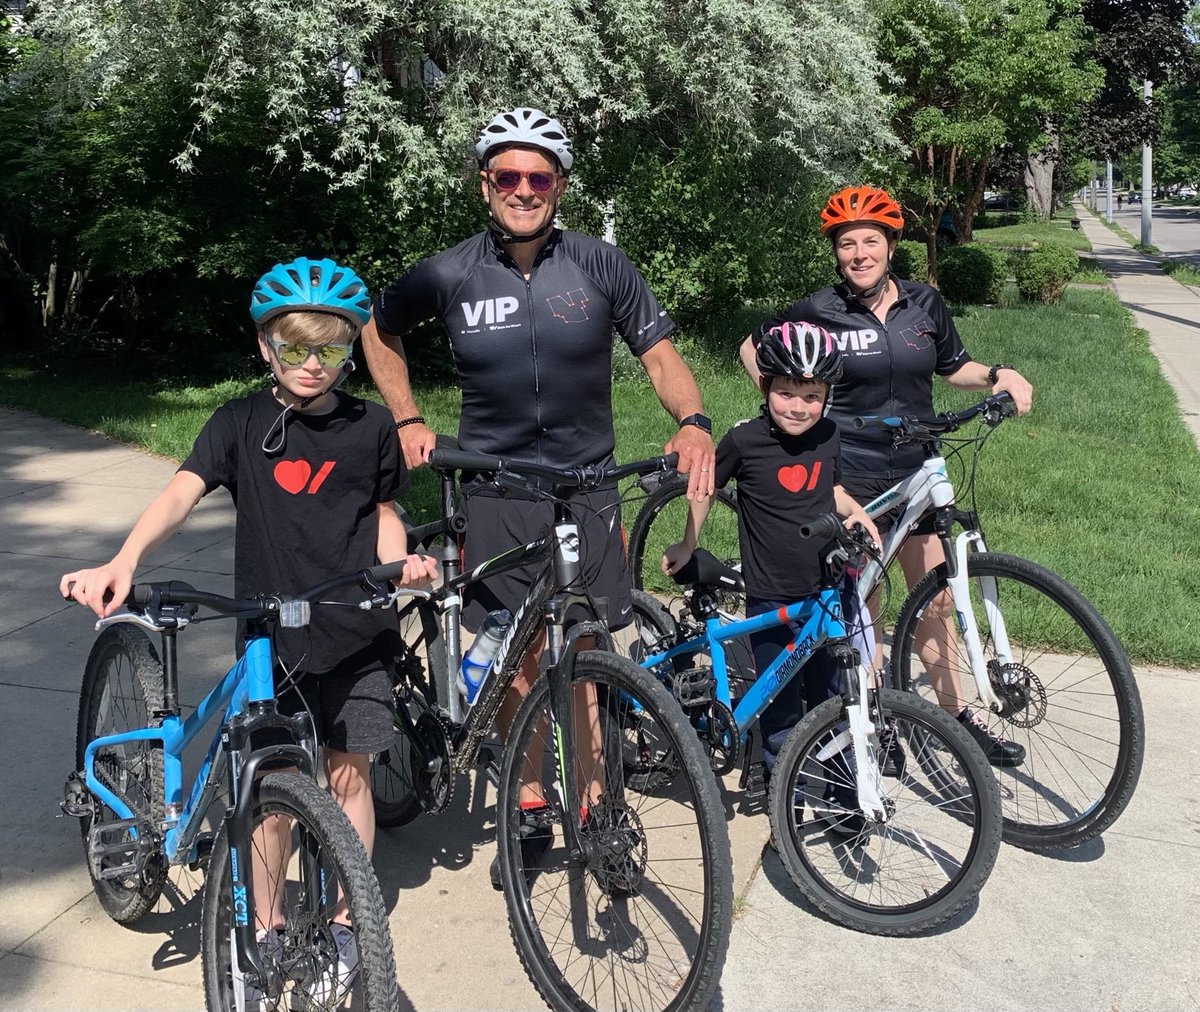 Power up your support for Heart & Stroke by becoming a Ride for Heart VIP - a Very Important Philanthropist! Only 9% of Ride for Heart participants are VIPs, but they are responsible for an incredible 30% of our funds raised! Learn more at rideforheart.ca/become-a-vip